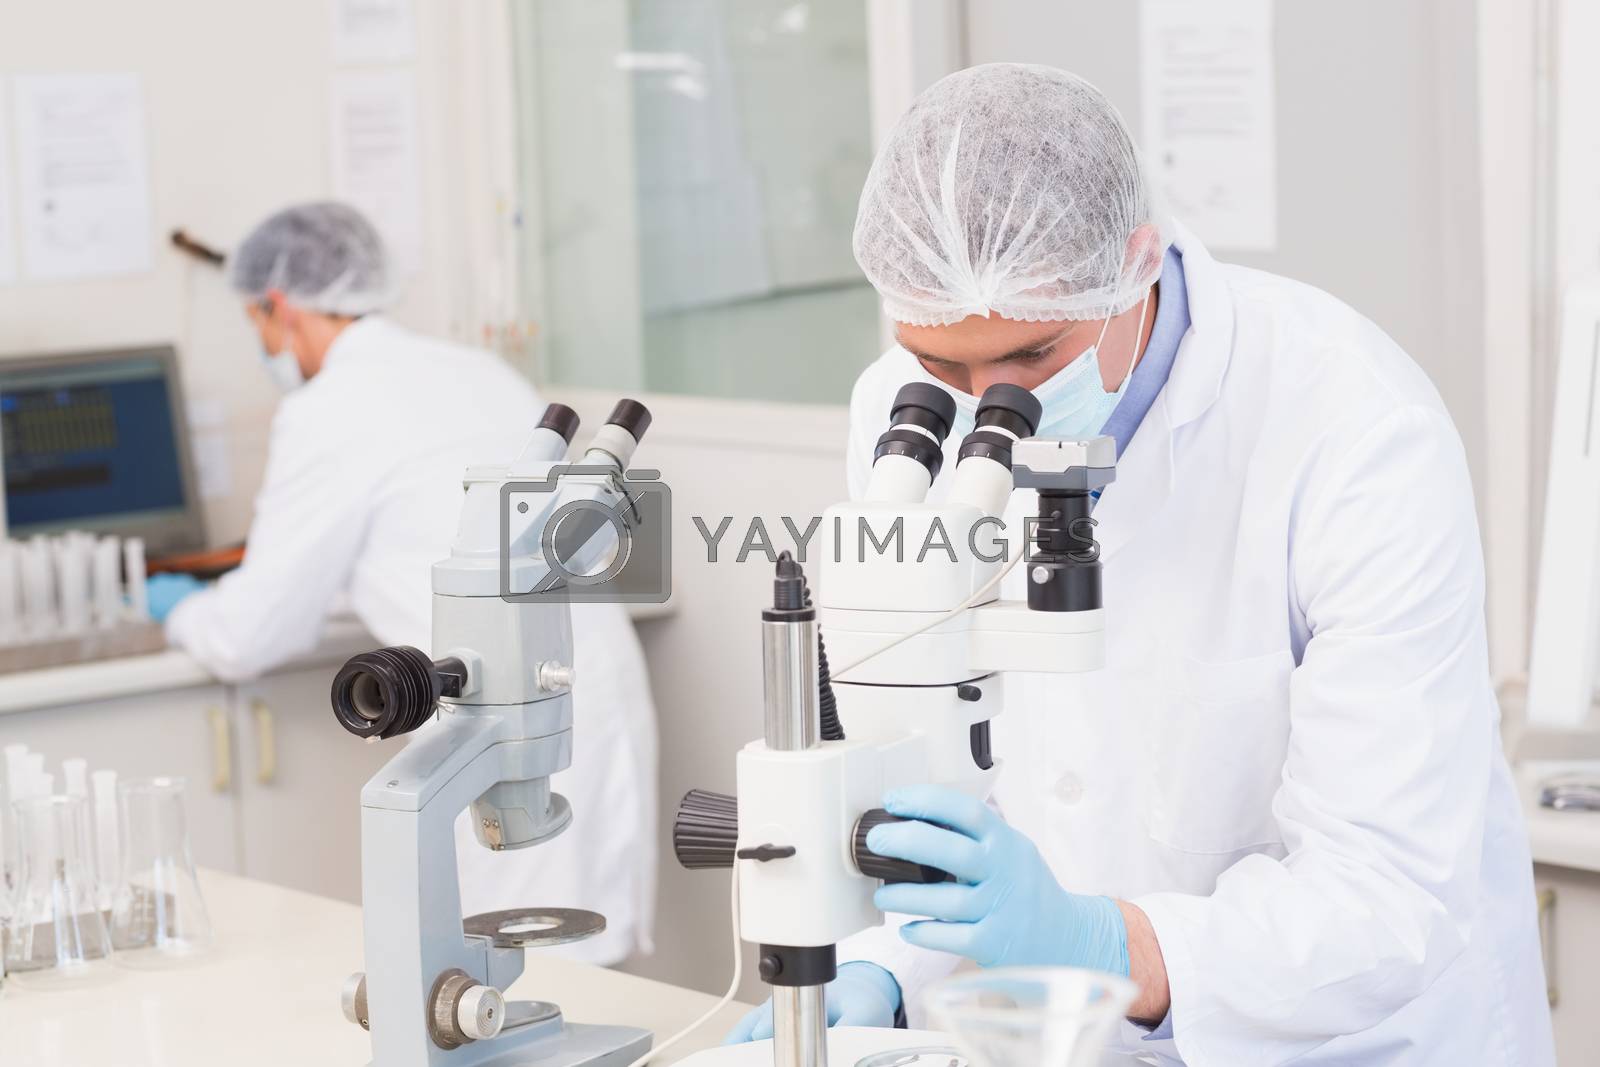 Royalty free image of Scientists working attentively with microscopes by Wavebreakmedia